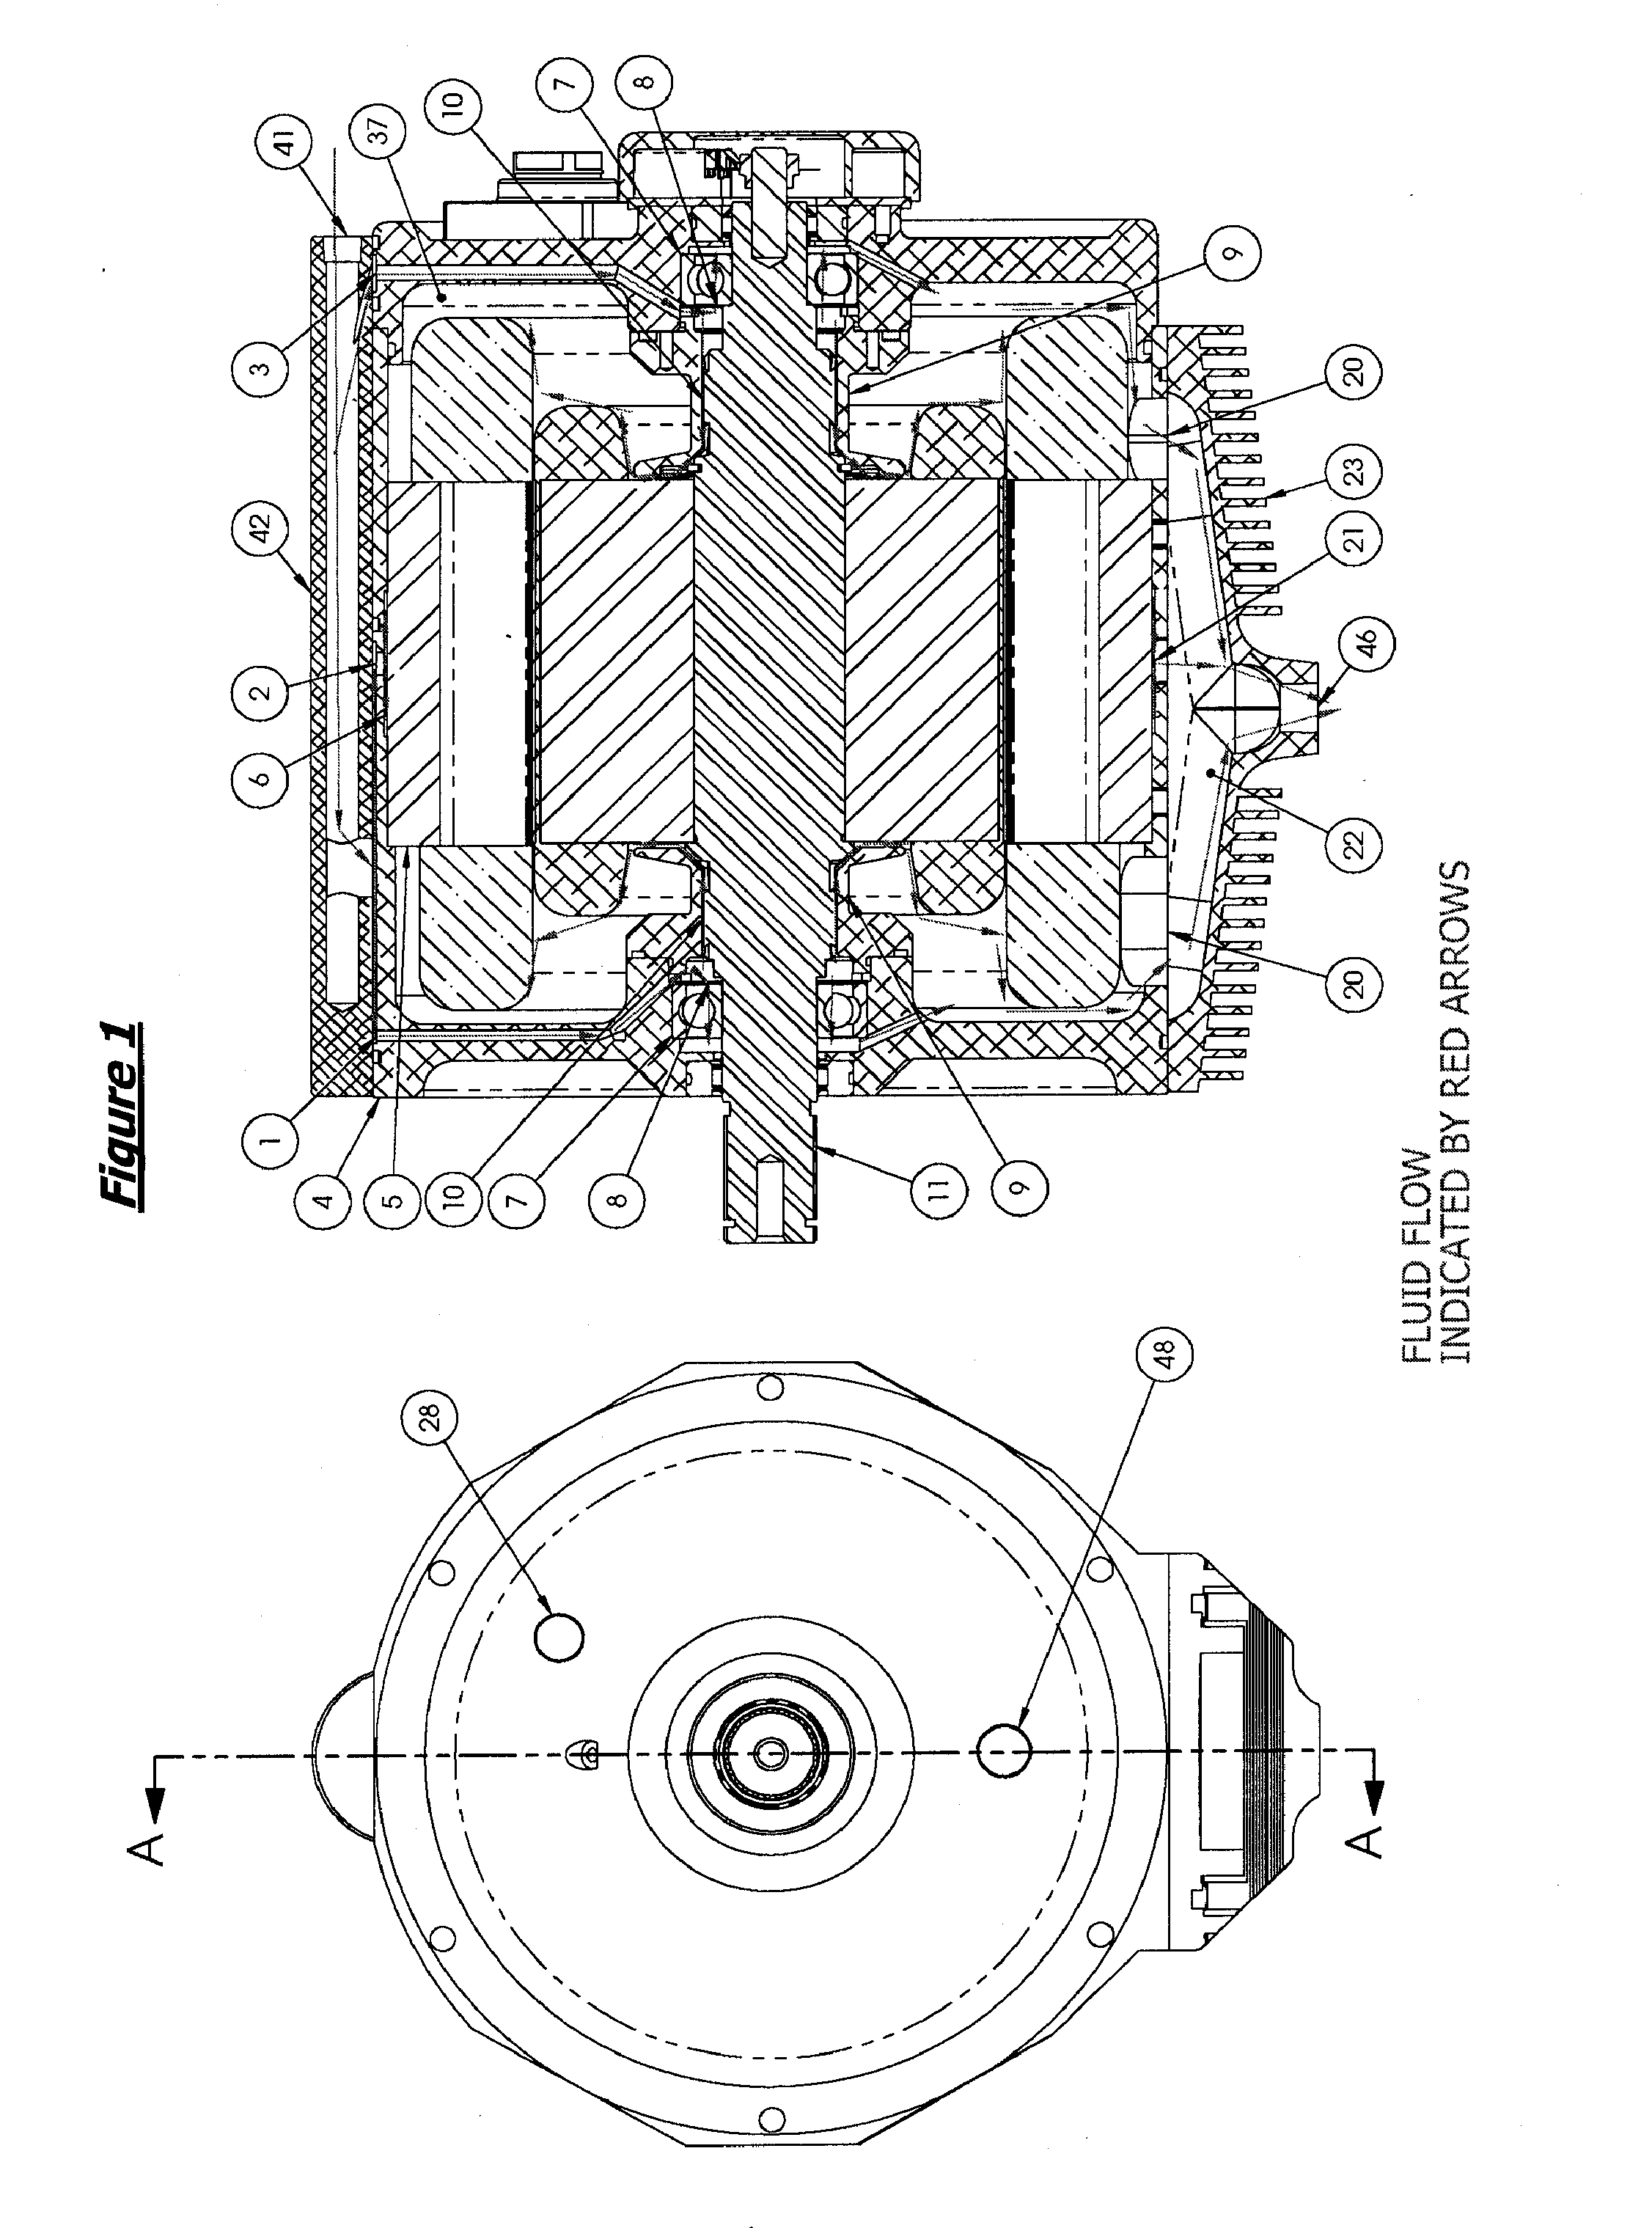 Systems and methods for cooling and lubrication of electric machines